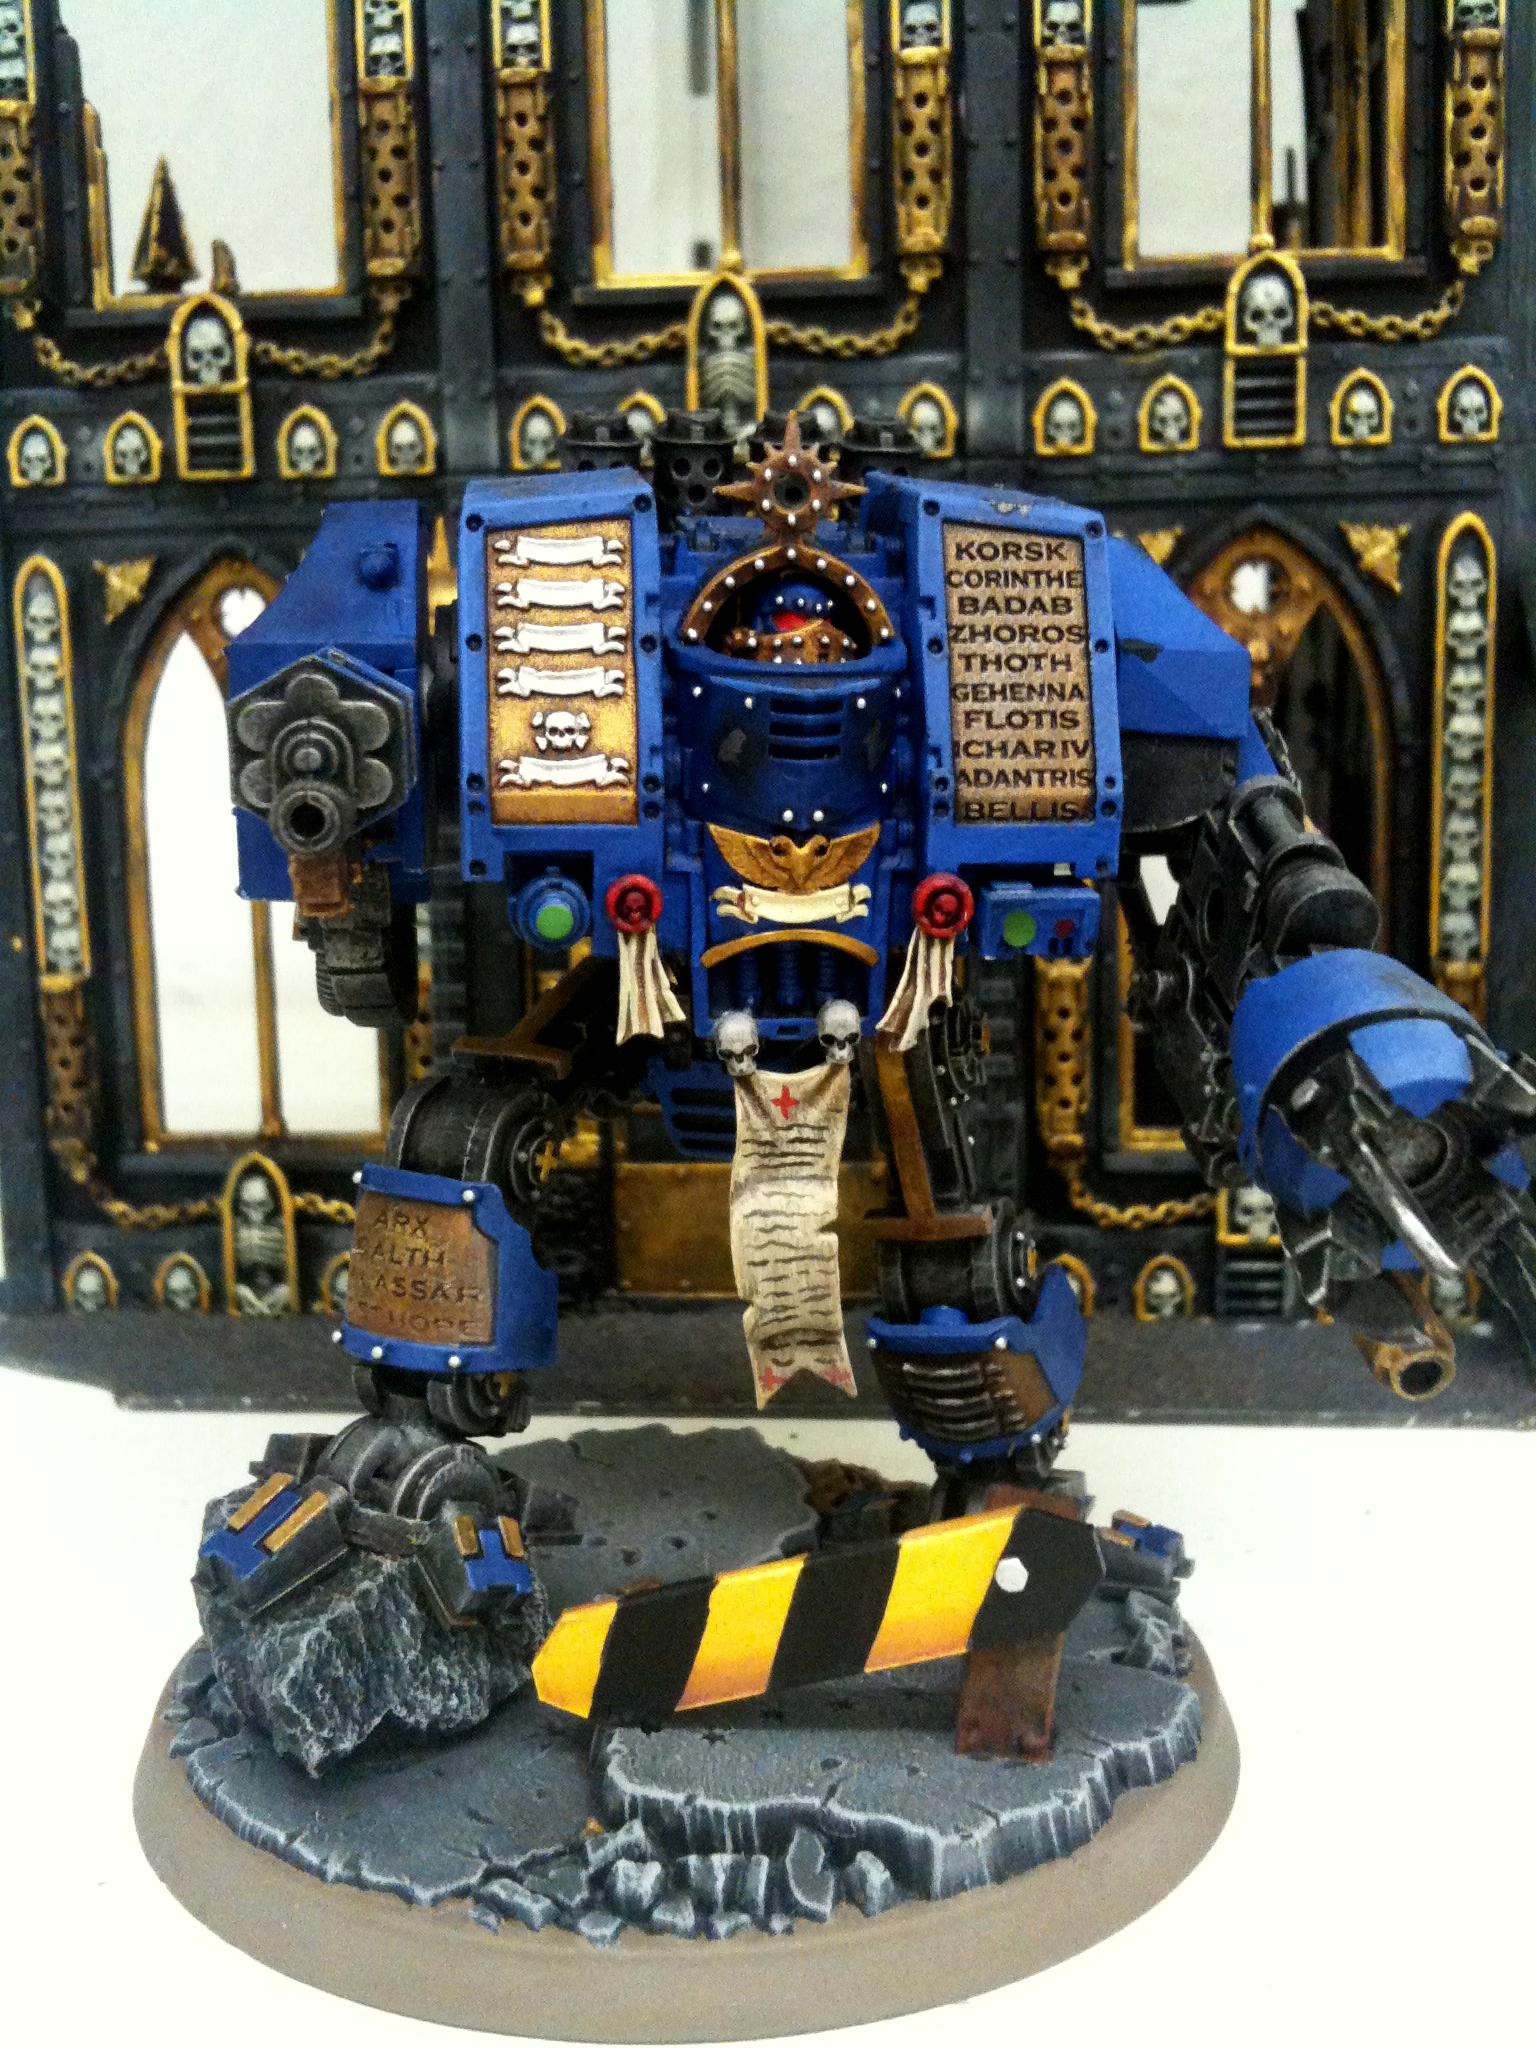 Cities Of Death, Conversion, Cybot, Dreadnought, Heroic, Space Marines, Ultramarines, Venerable Dreadnaught